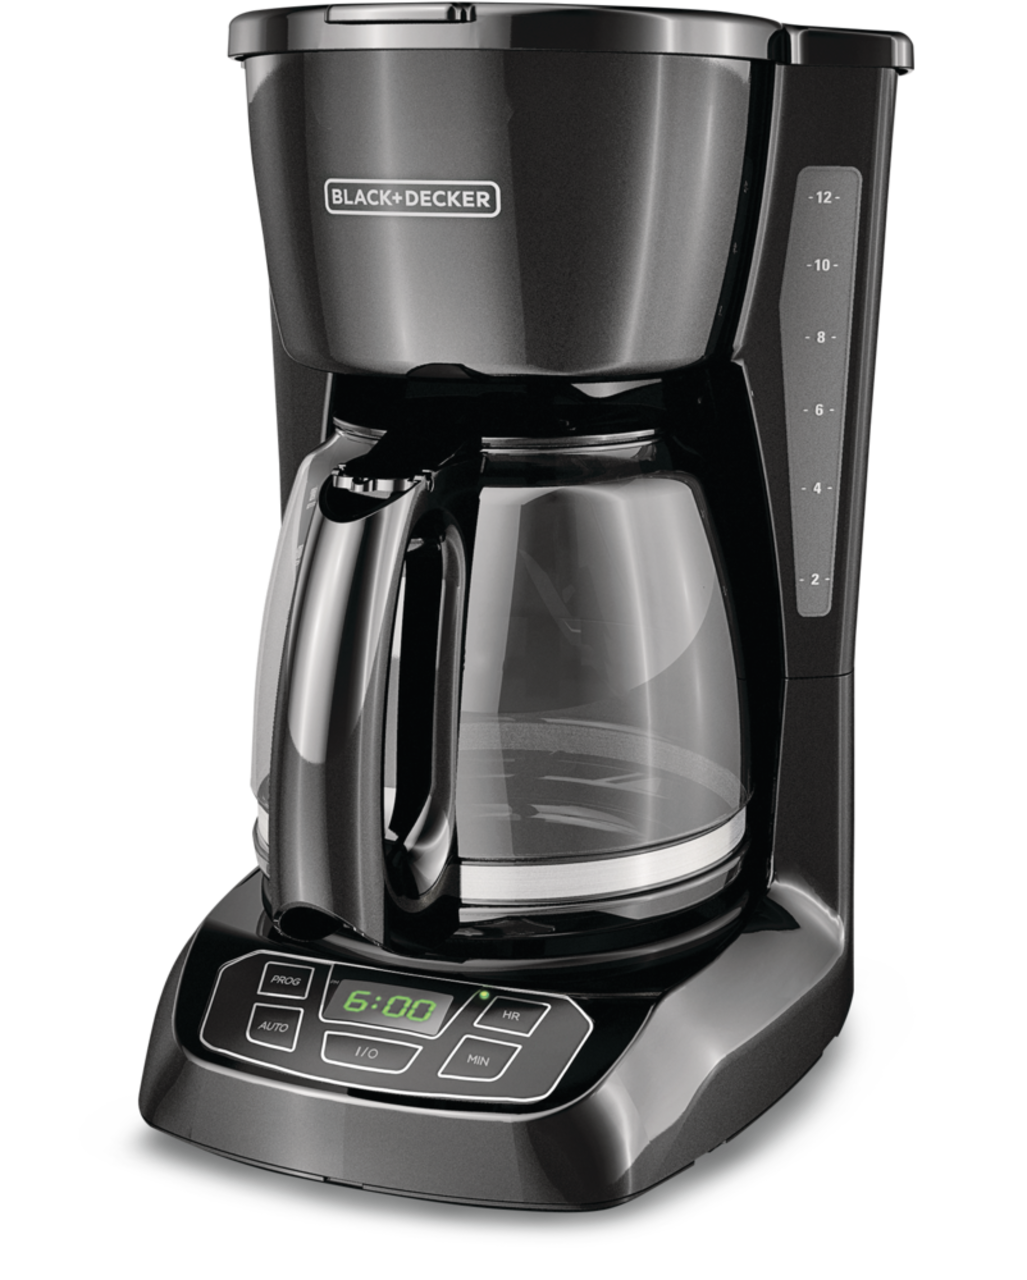 https://media-www.canadiantire.ca/product/living/kitchen/kitchen-appliances/0430518/black-decker-12-cup-digital-coffeemaker-03ced732-5c2b-42f2-b893-a24e428e8831.png?imdensity=1&imwidth=640&impolicy=mZoom